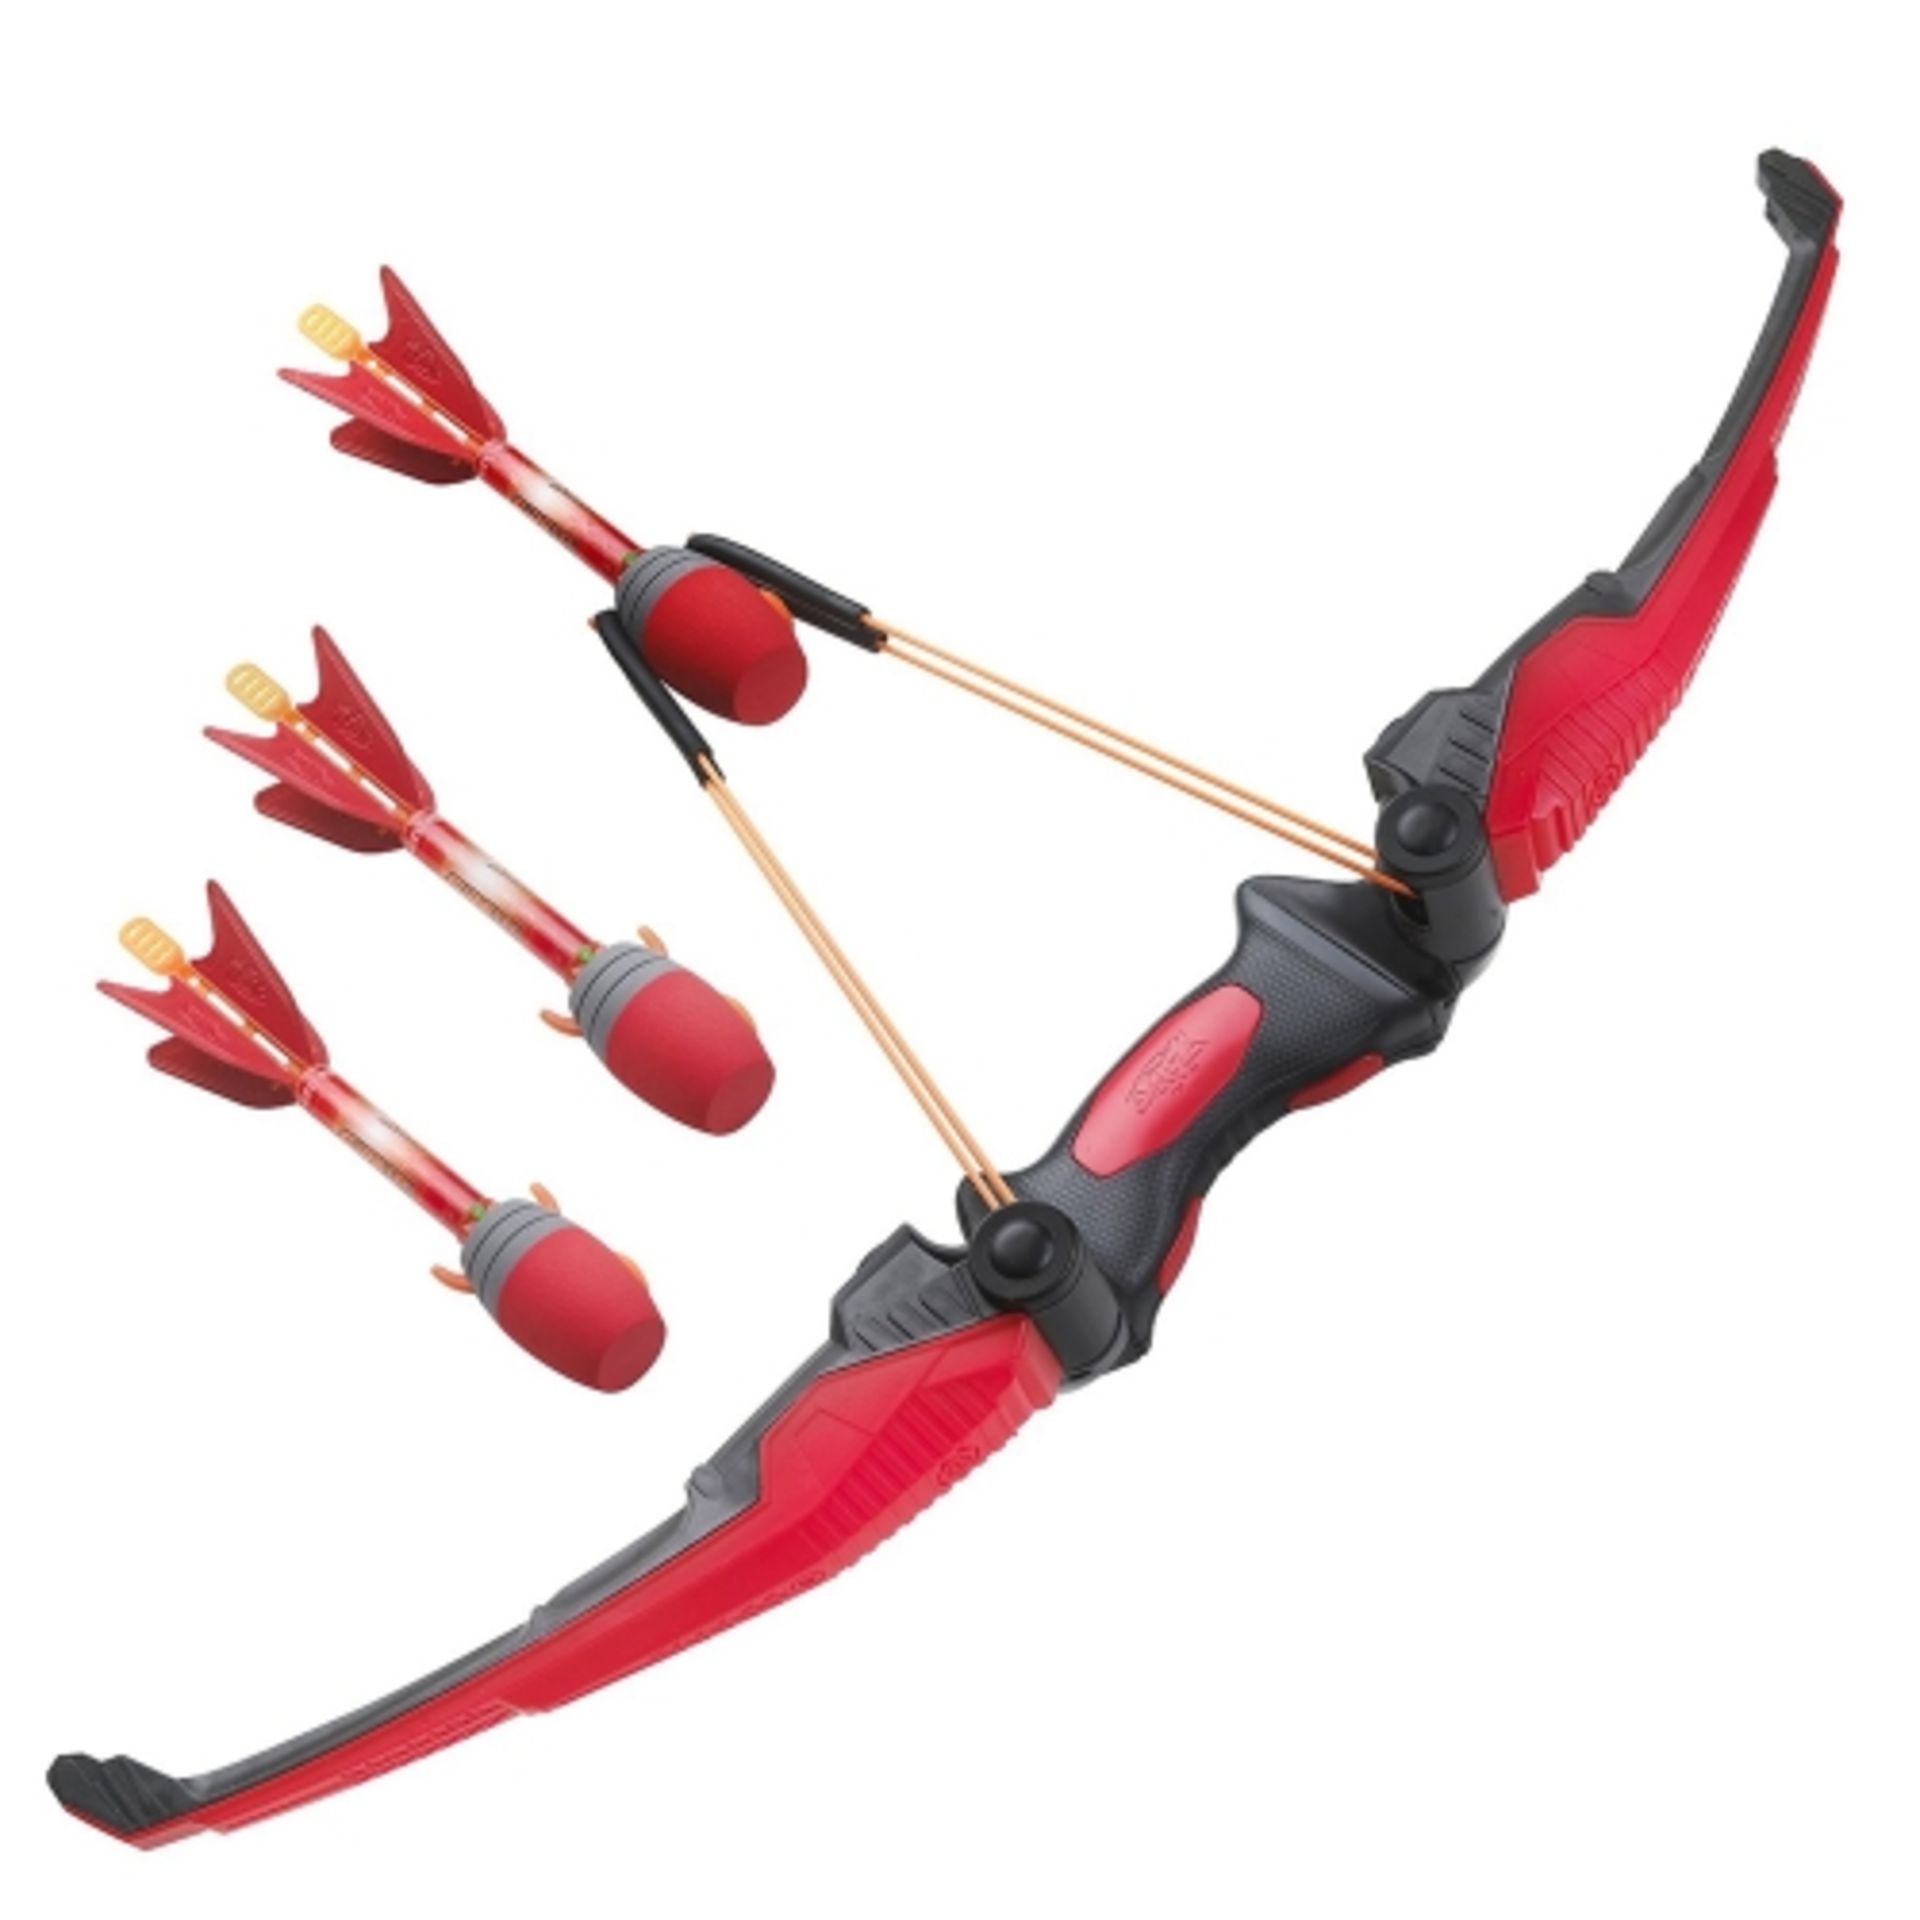 V Grade A Air Storm Firetek Bow with Three Arrows and 45m Firing Range RRP £29.99 - Image 2 of 2